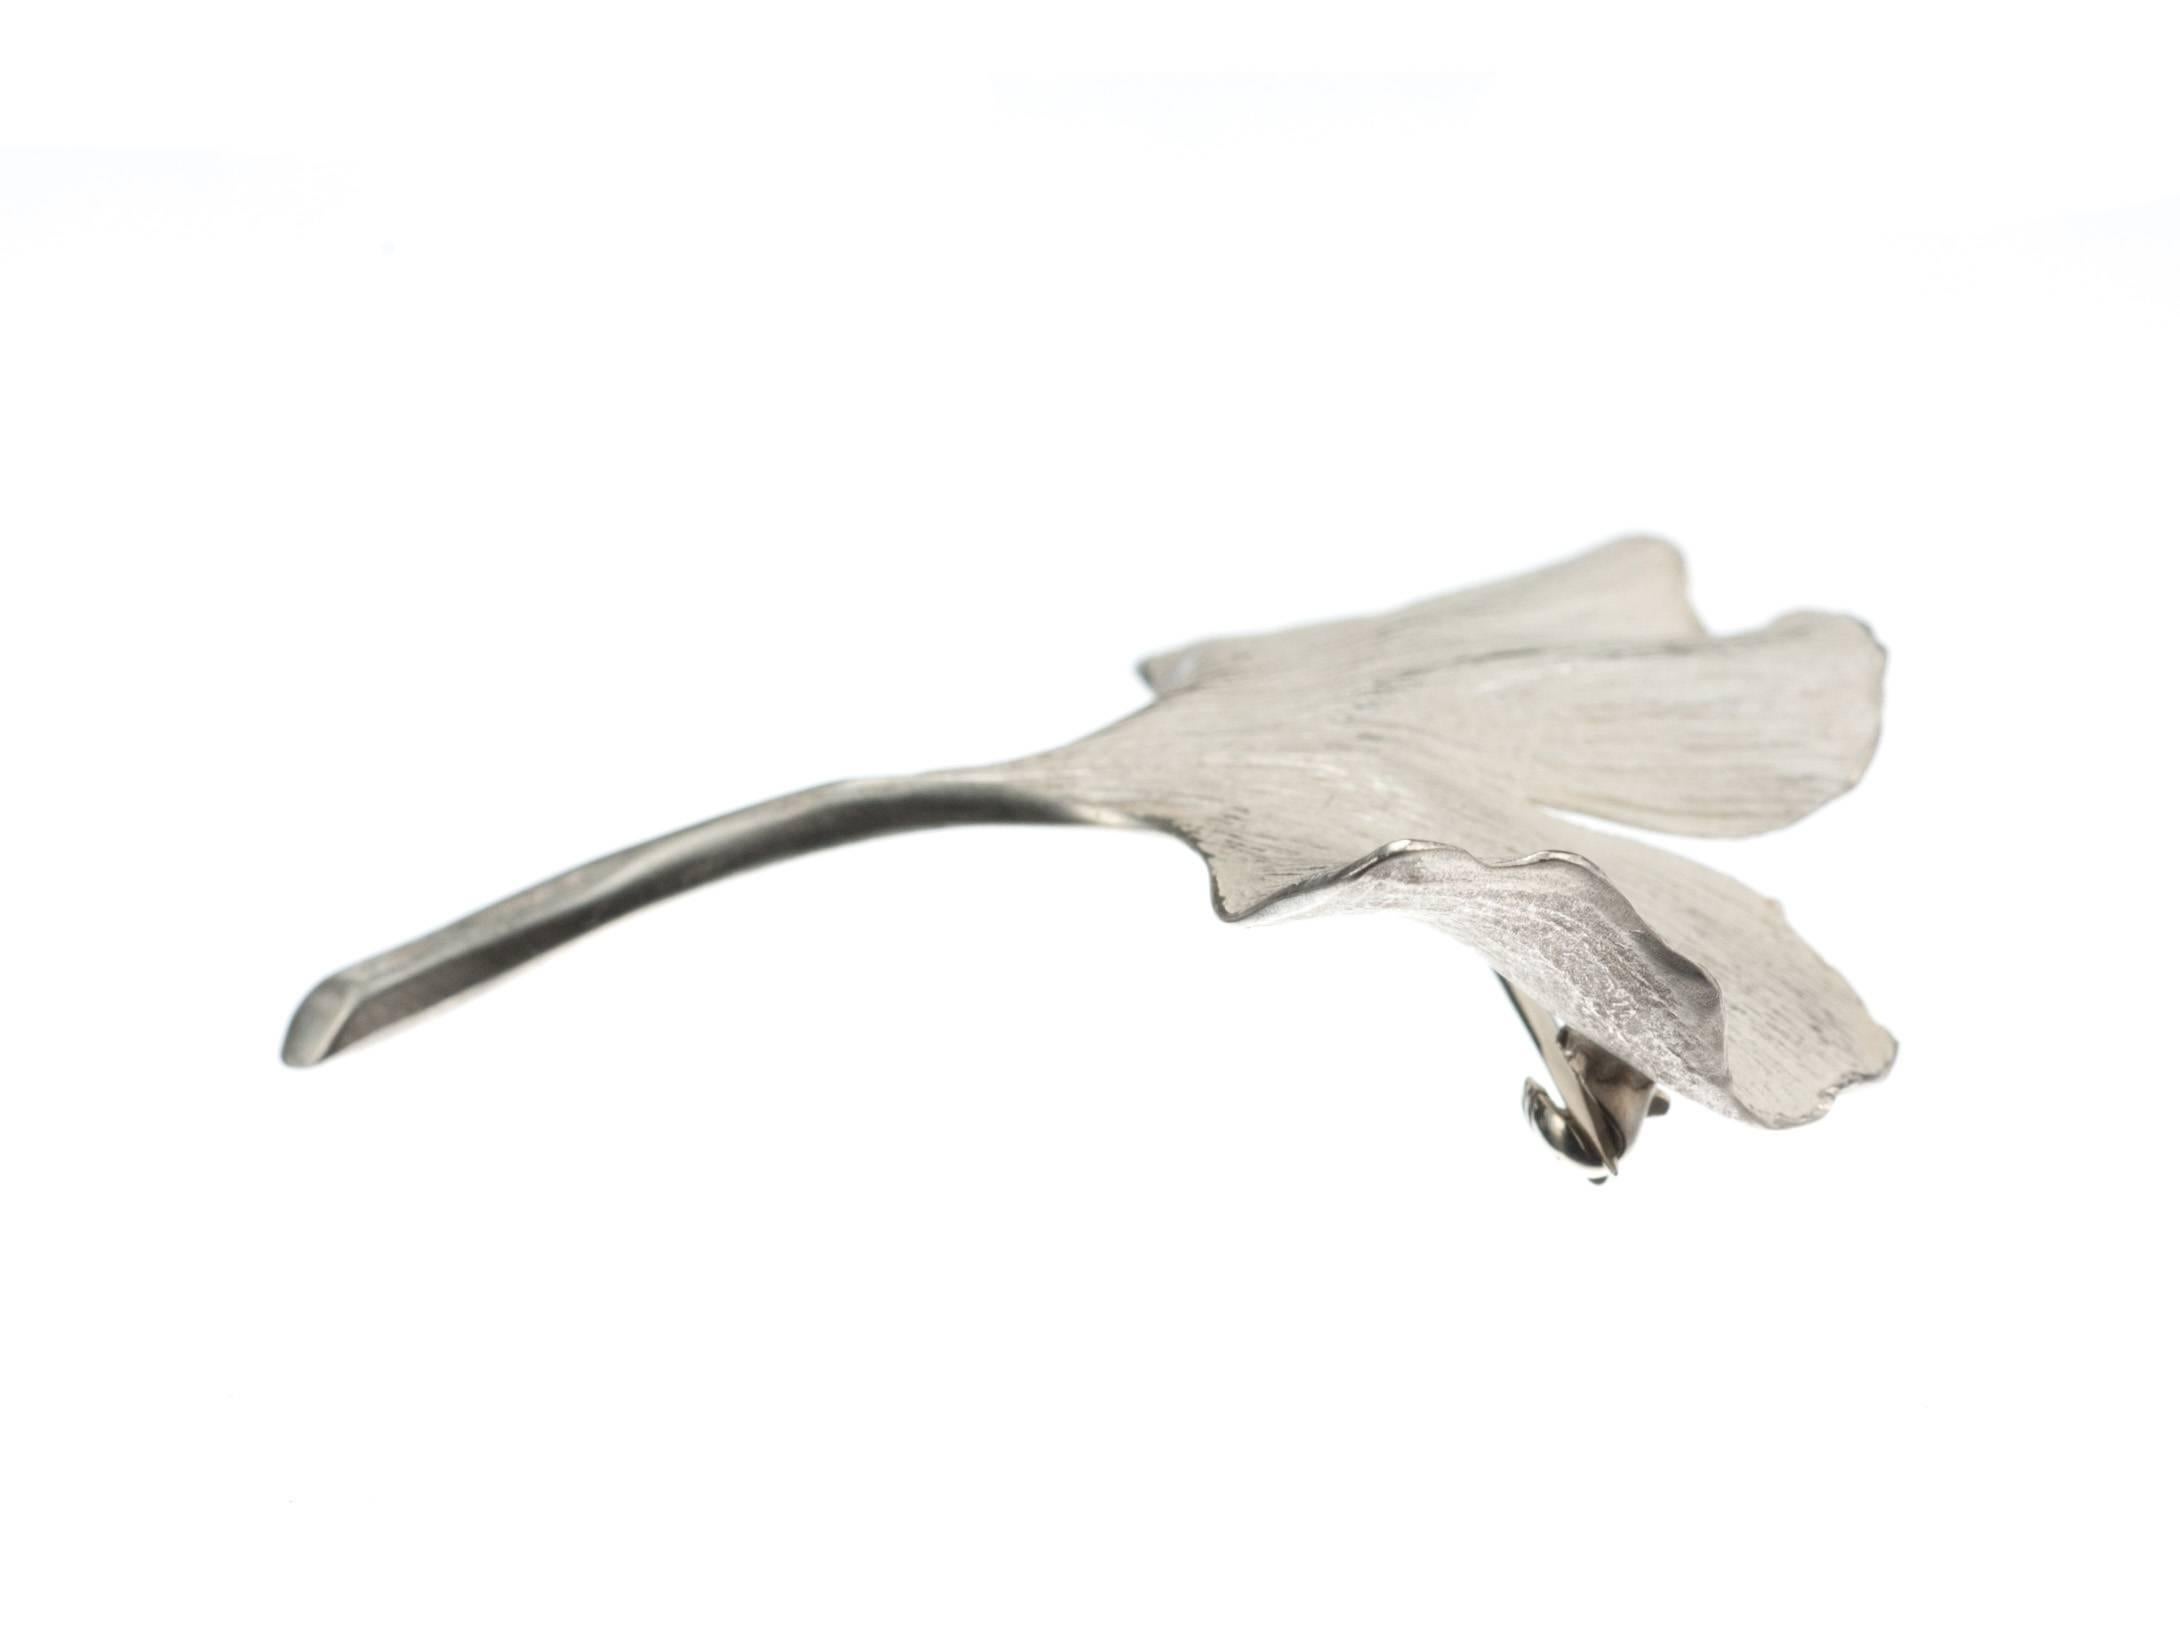 A sterling silver Ginkgo leaf pin, from designer John Iversen, made in his signature naturalistic style and made from actual leaves that are destroyed during the casting process. The soft white matte-finish applied to the pin not only complements